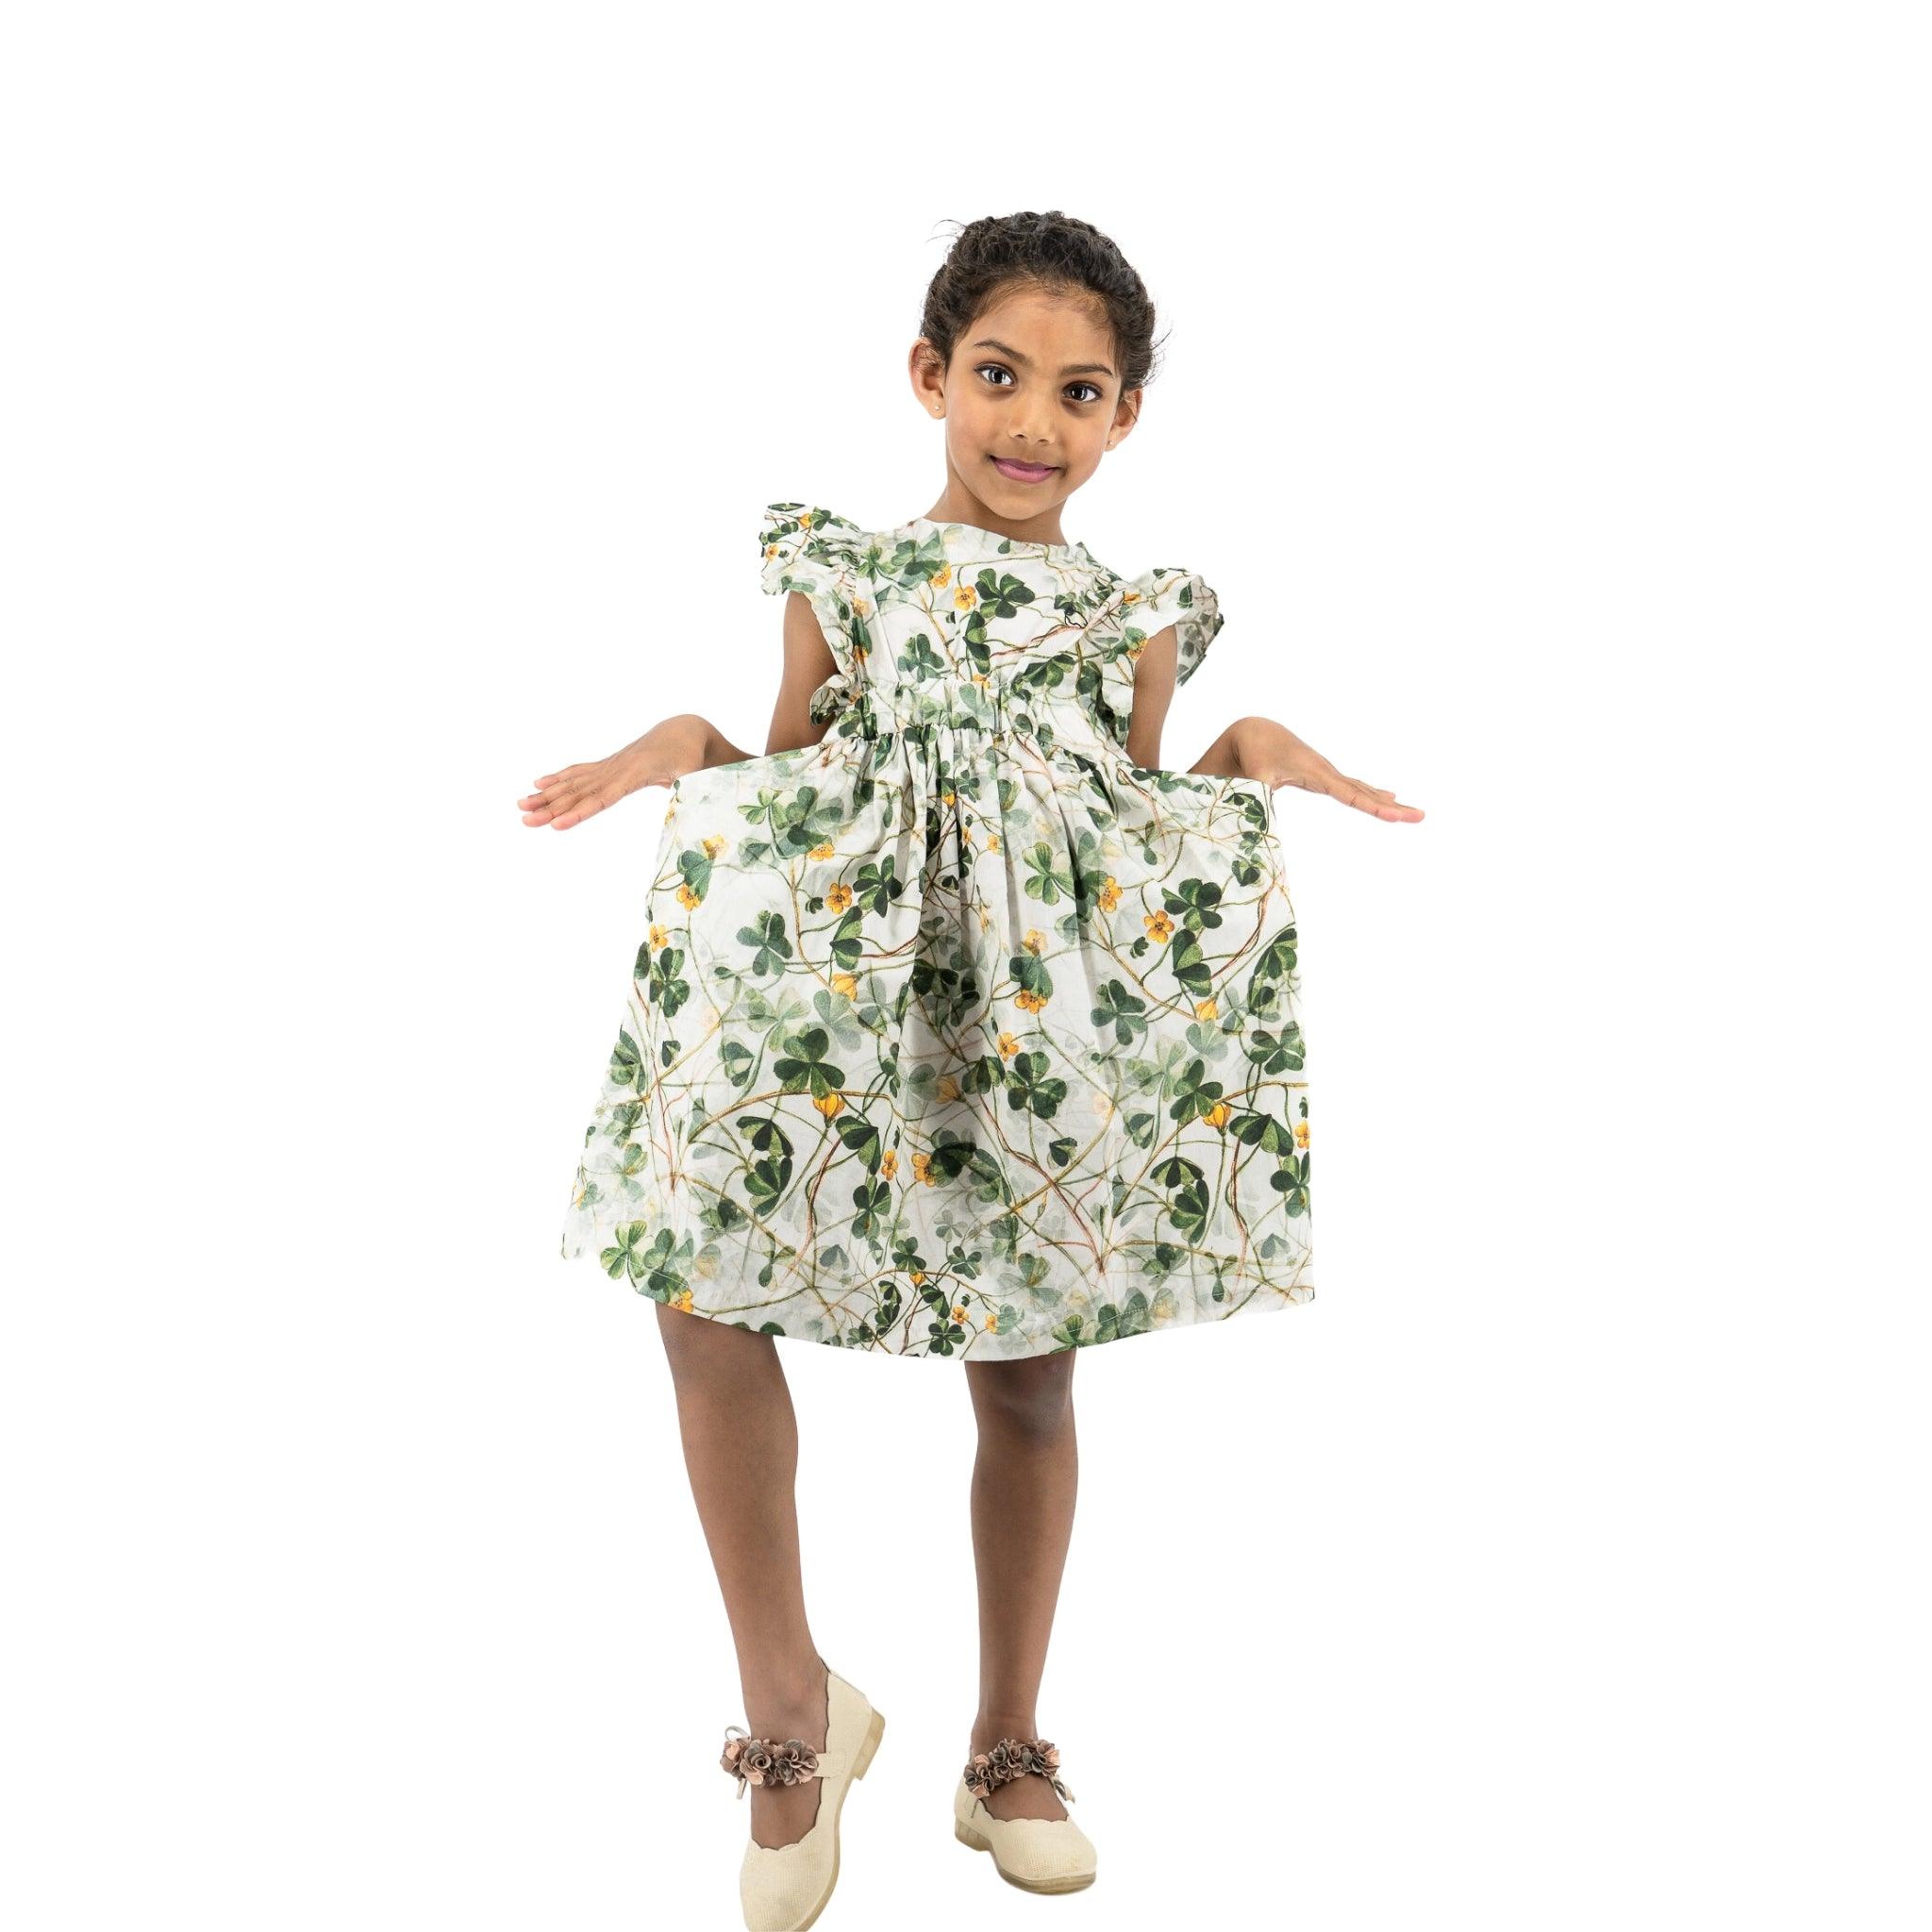 Young girl in a Karee green floral cotton dress for girls standing with arms slightly raised, smiling at the camera, isolated on a white background.